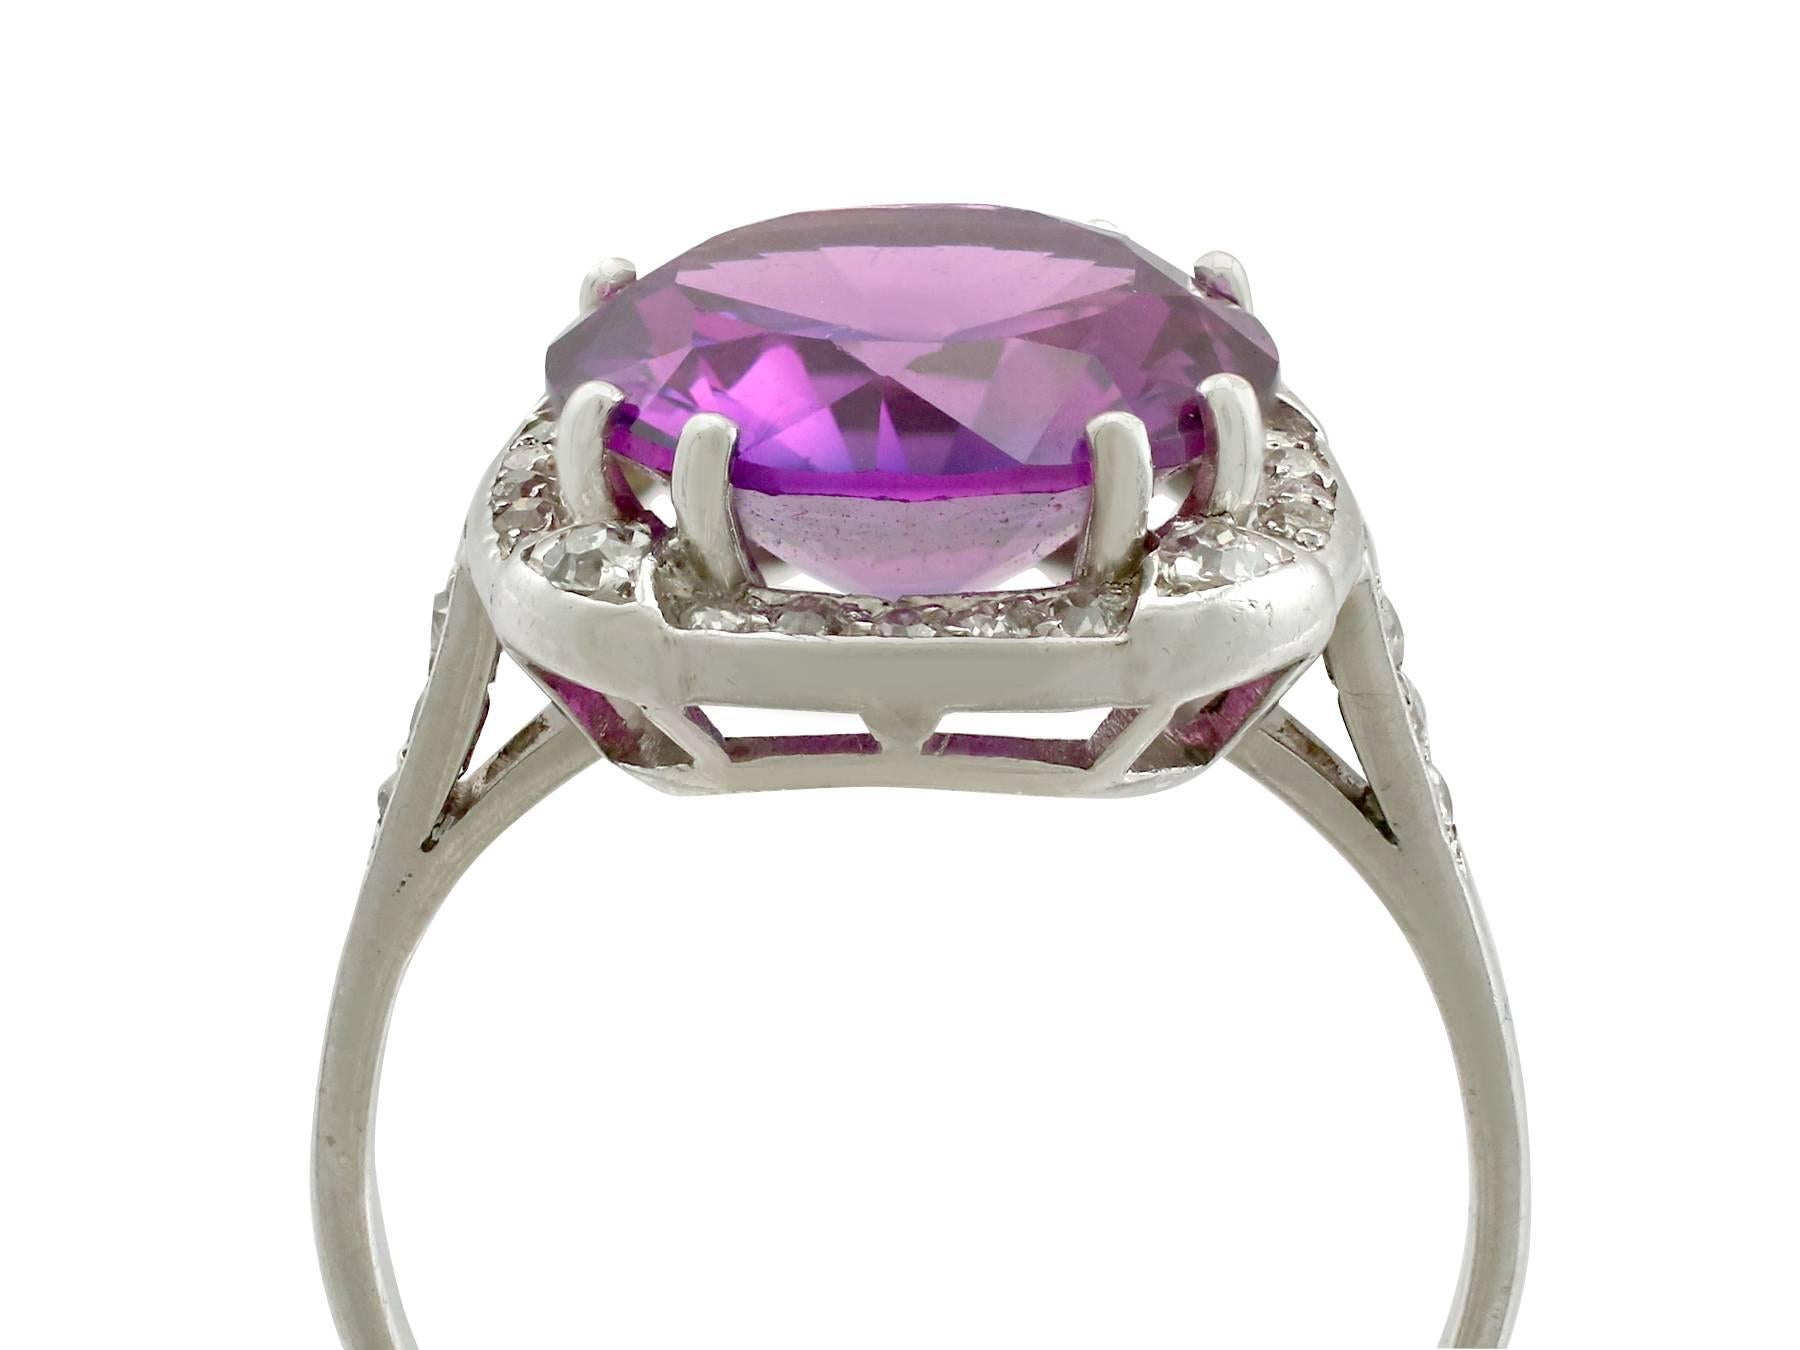 An impressive artificial alexandrite (synthetic corundum), 0.32 carat diamond and platinum cocktail ring; part of our diverse antique jewelry collections

This fine and impressive artificial alexandrite ring has been crafted in platinum.

The